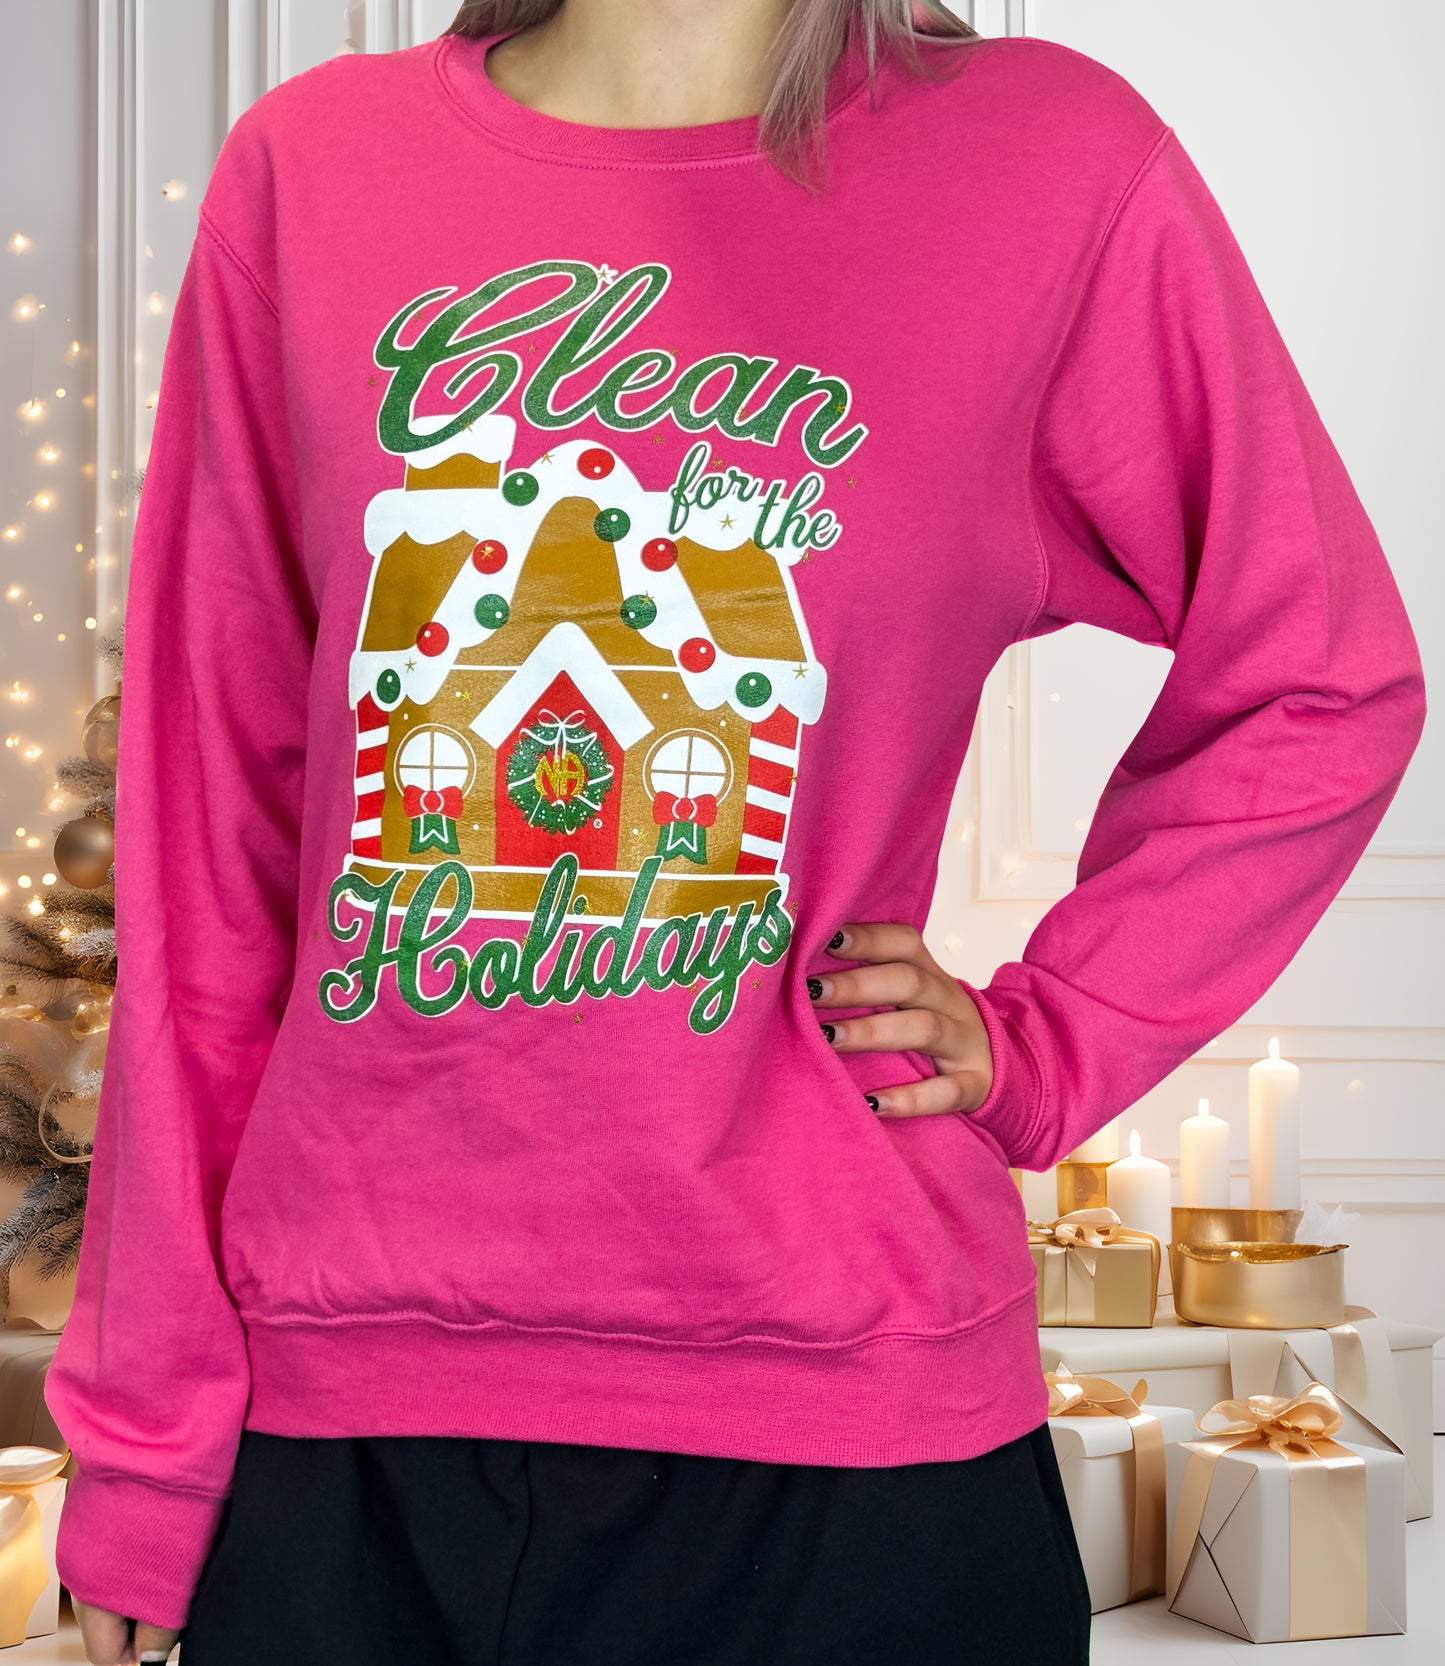 Clean For the Holidays Sweater- With Glitter!